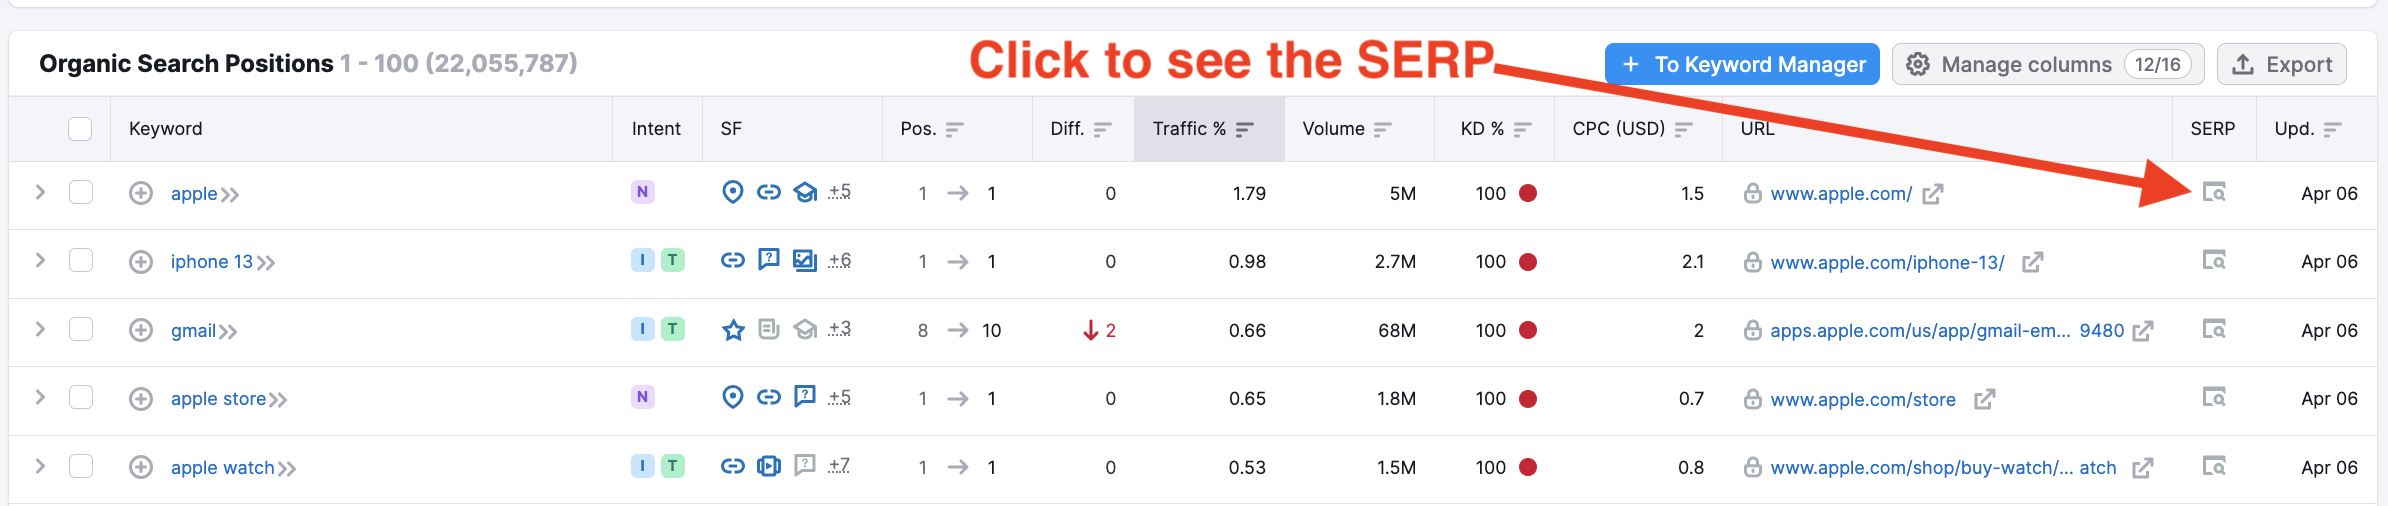 Organic Search Positions report from Organic Research. The report contains a list of keywords with metrics provided for each one of them in separate columns. A red arrow is pointing at one of the smaller columns titled SERP, more specifically, at one of the SERP icons. Above the report and next to the arrow, there is the following red text: Click to see the SERP.